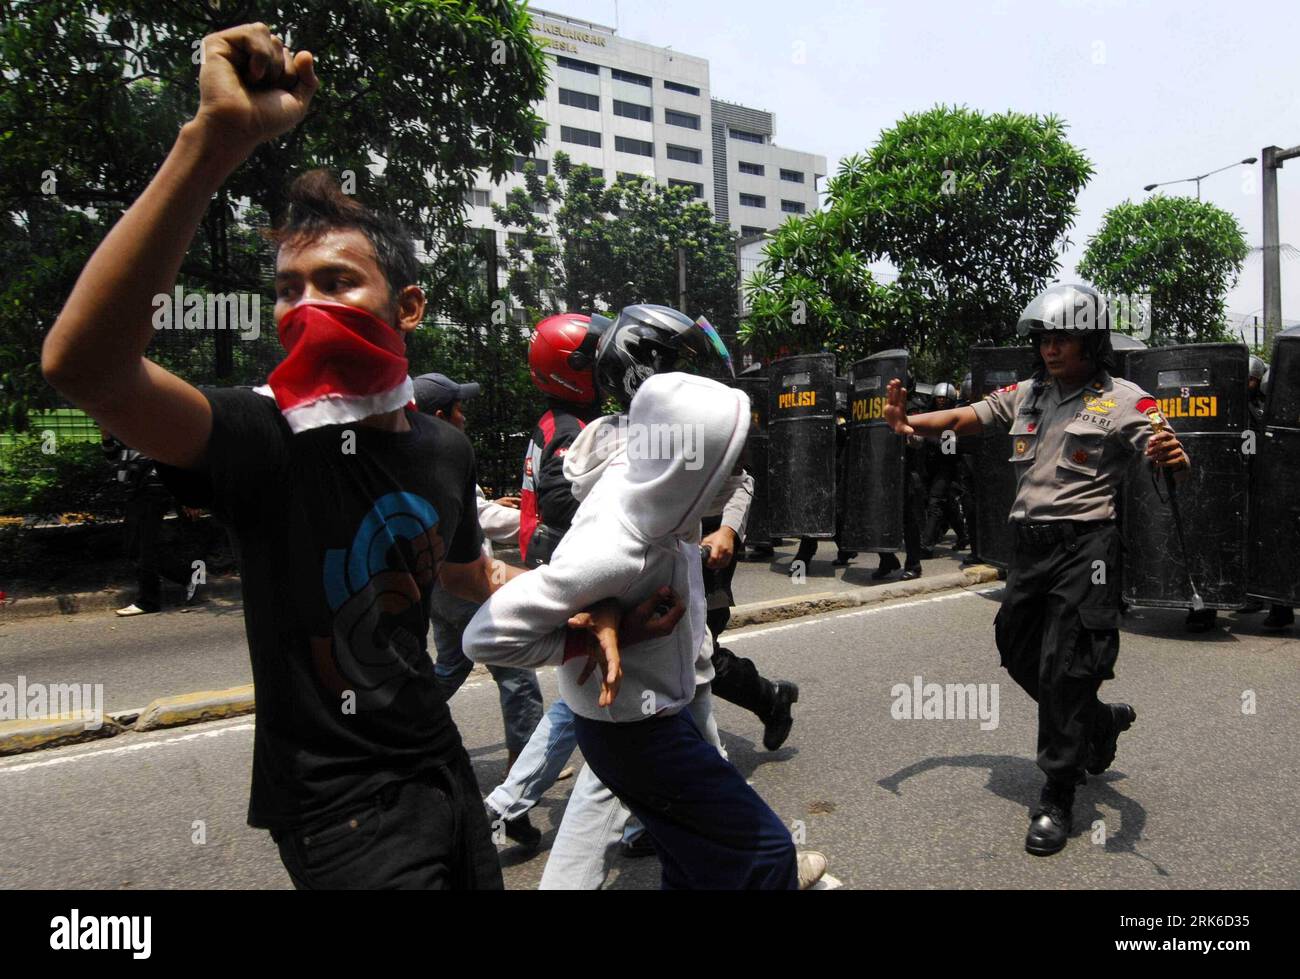 Bildnummer: 53829215  Datum: 02.03.2010  Copyright: imago/Xinhua (100302) -- JAKARTA, March 2, 2010 (Xinhua) -- Riot police disperse protestors in front of the House of Representatives building in Jakarta, capital of Indonesia, March 2, 2010. About 1,000 protestors clashed on Tuesday with riot police due to dissatisfaction for the decision taken by Parliament Speaker Marzuki Alie to close the plenary session discussing banking bailout on Bank Century worth 6.7 trillion rupiah (about 724.3 million U.S. dollars). (Xinhua/Yue Yuewei) (zl) (10)INDONESIA-JAKARTA-BANKING BAILOUT-CLASH PUBLICATIONxNO Stock Photo